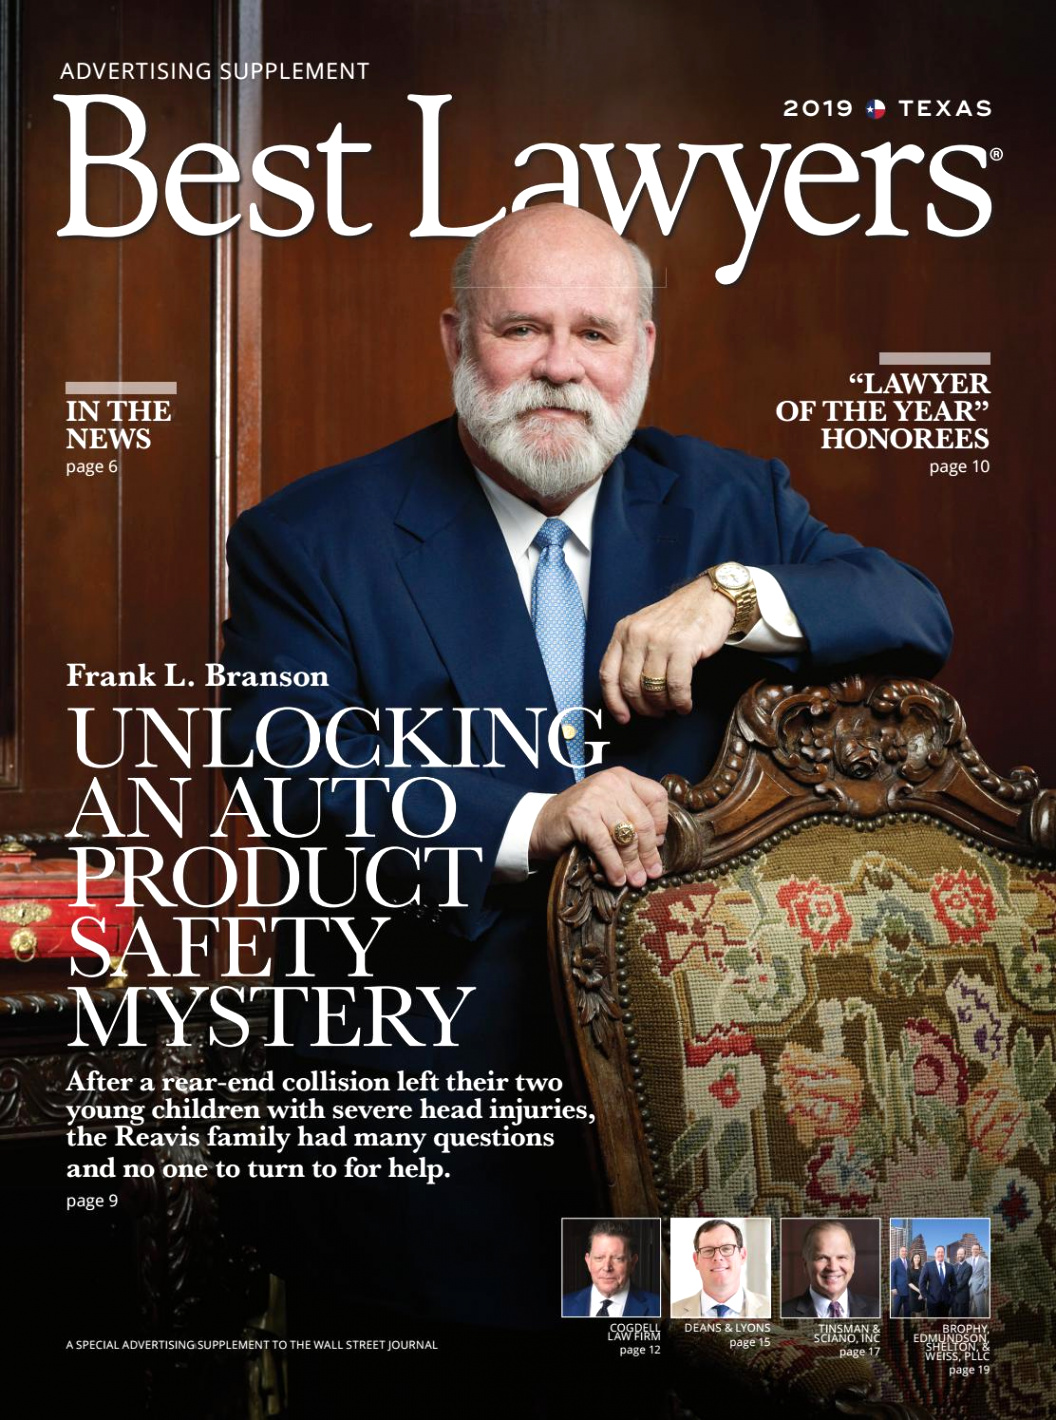 Personil Injury Lawyer In Shackelford Tx Dans the Best Lawyers In Texas 2019 by Best Lawyers - issuu